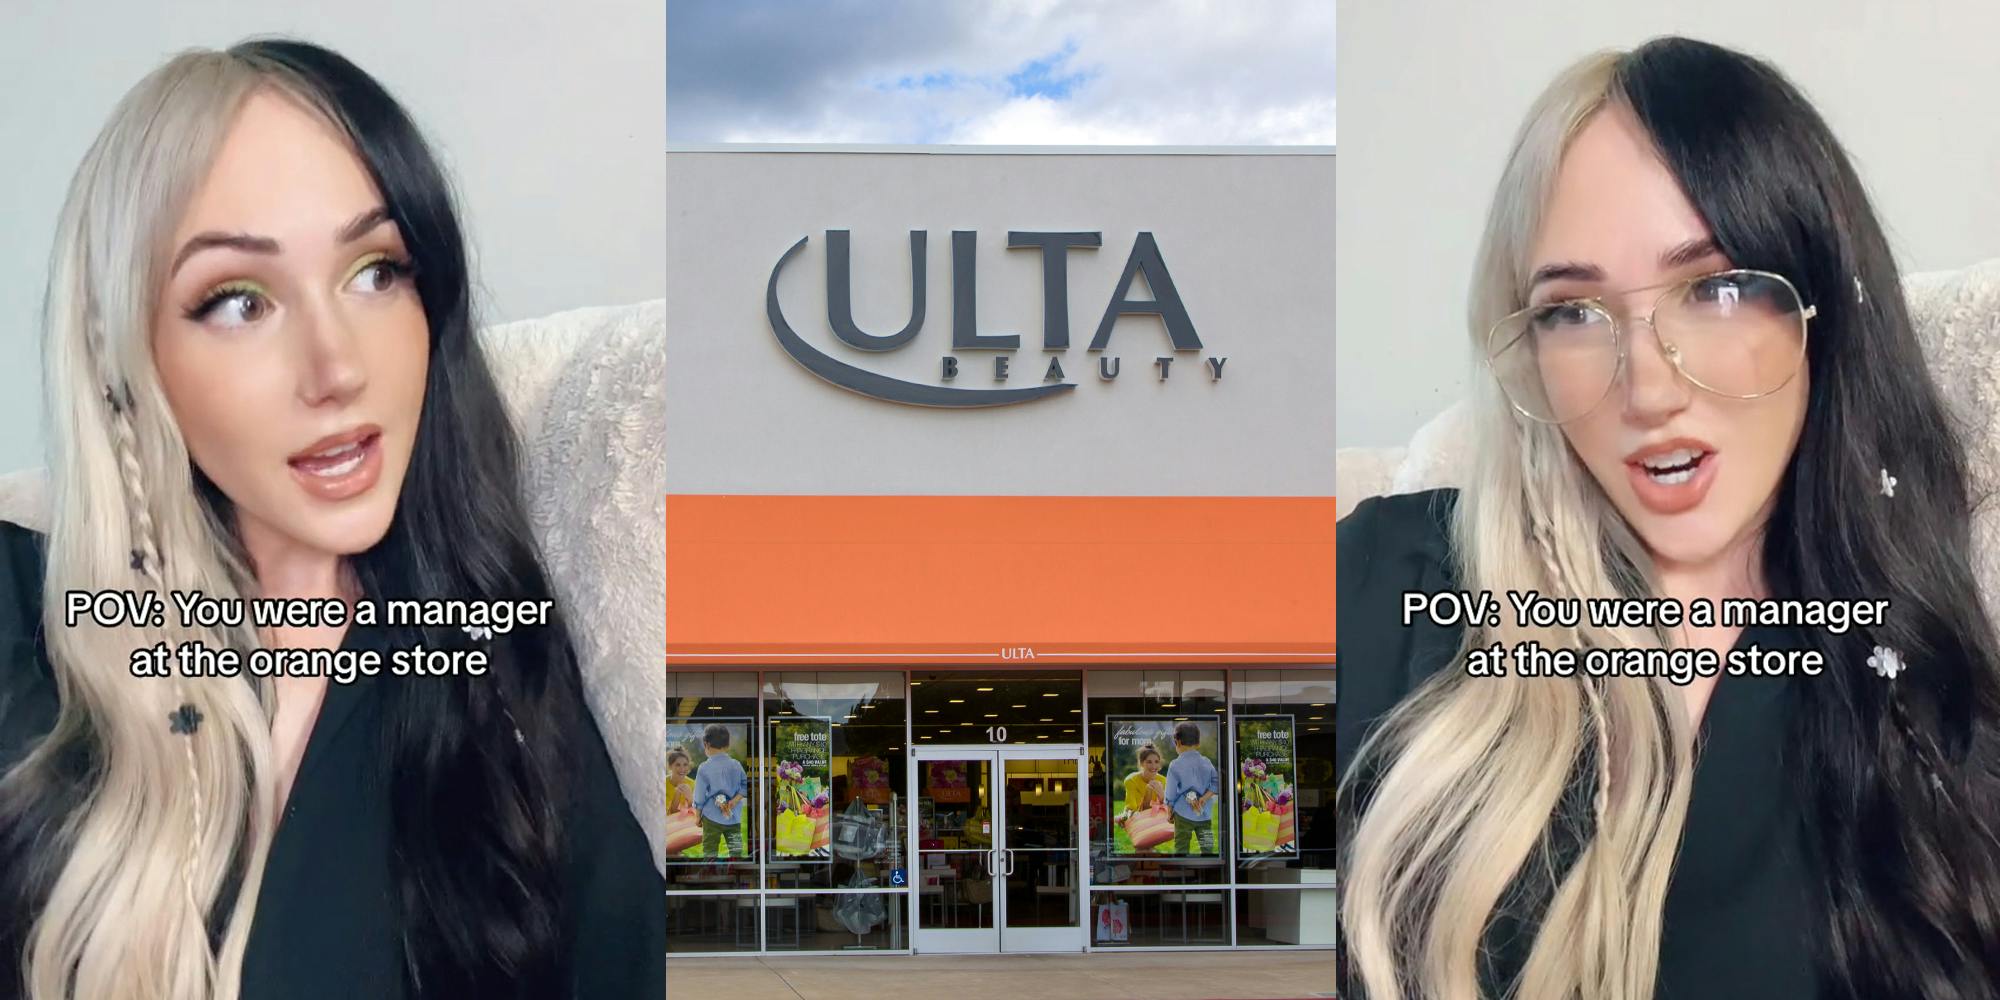 Ulta employee speaking with caption "POV: You were a manager at the orange store" (l) Ulta entrance with sign (c) Ulta employee speaking with caption "POV: You were a manager at the orange store" (r)